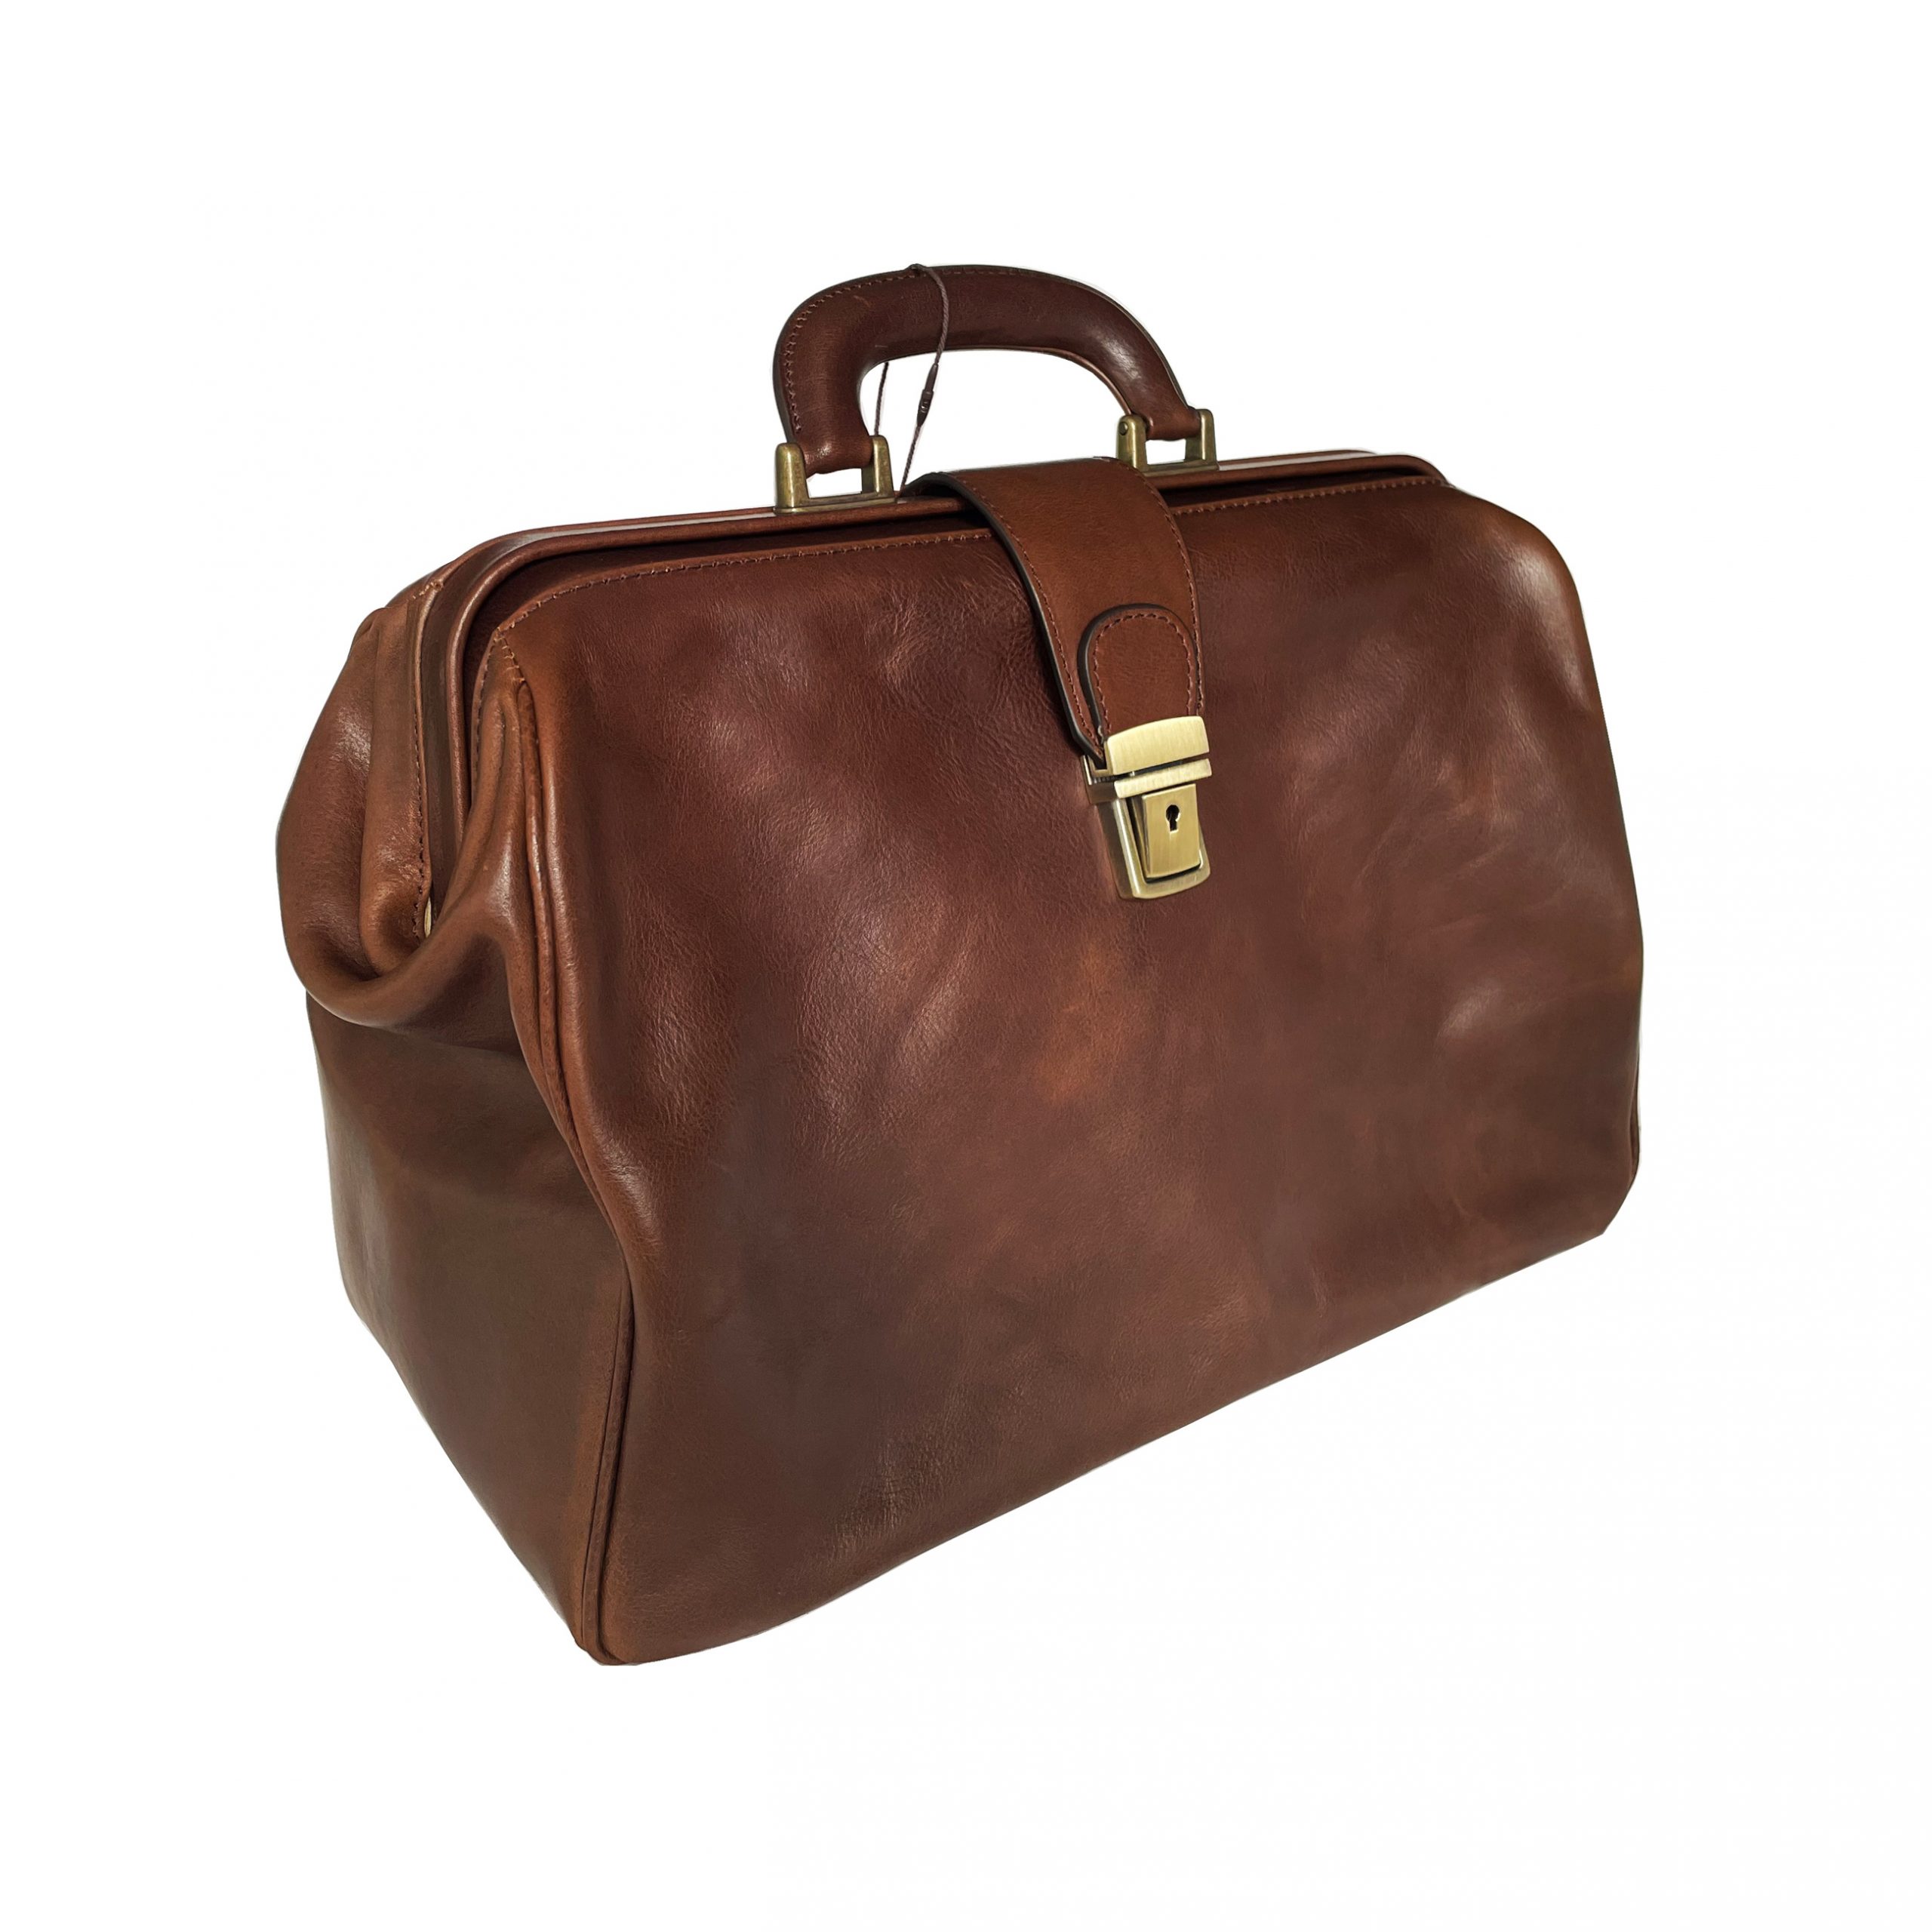 Leather doctor bag makes this leather doctor bag a must-have in every type of style and occasion.